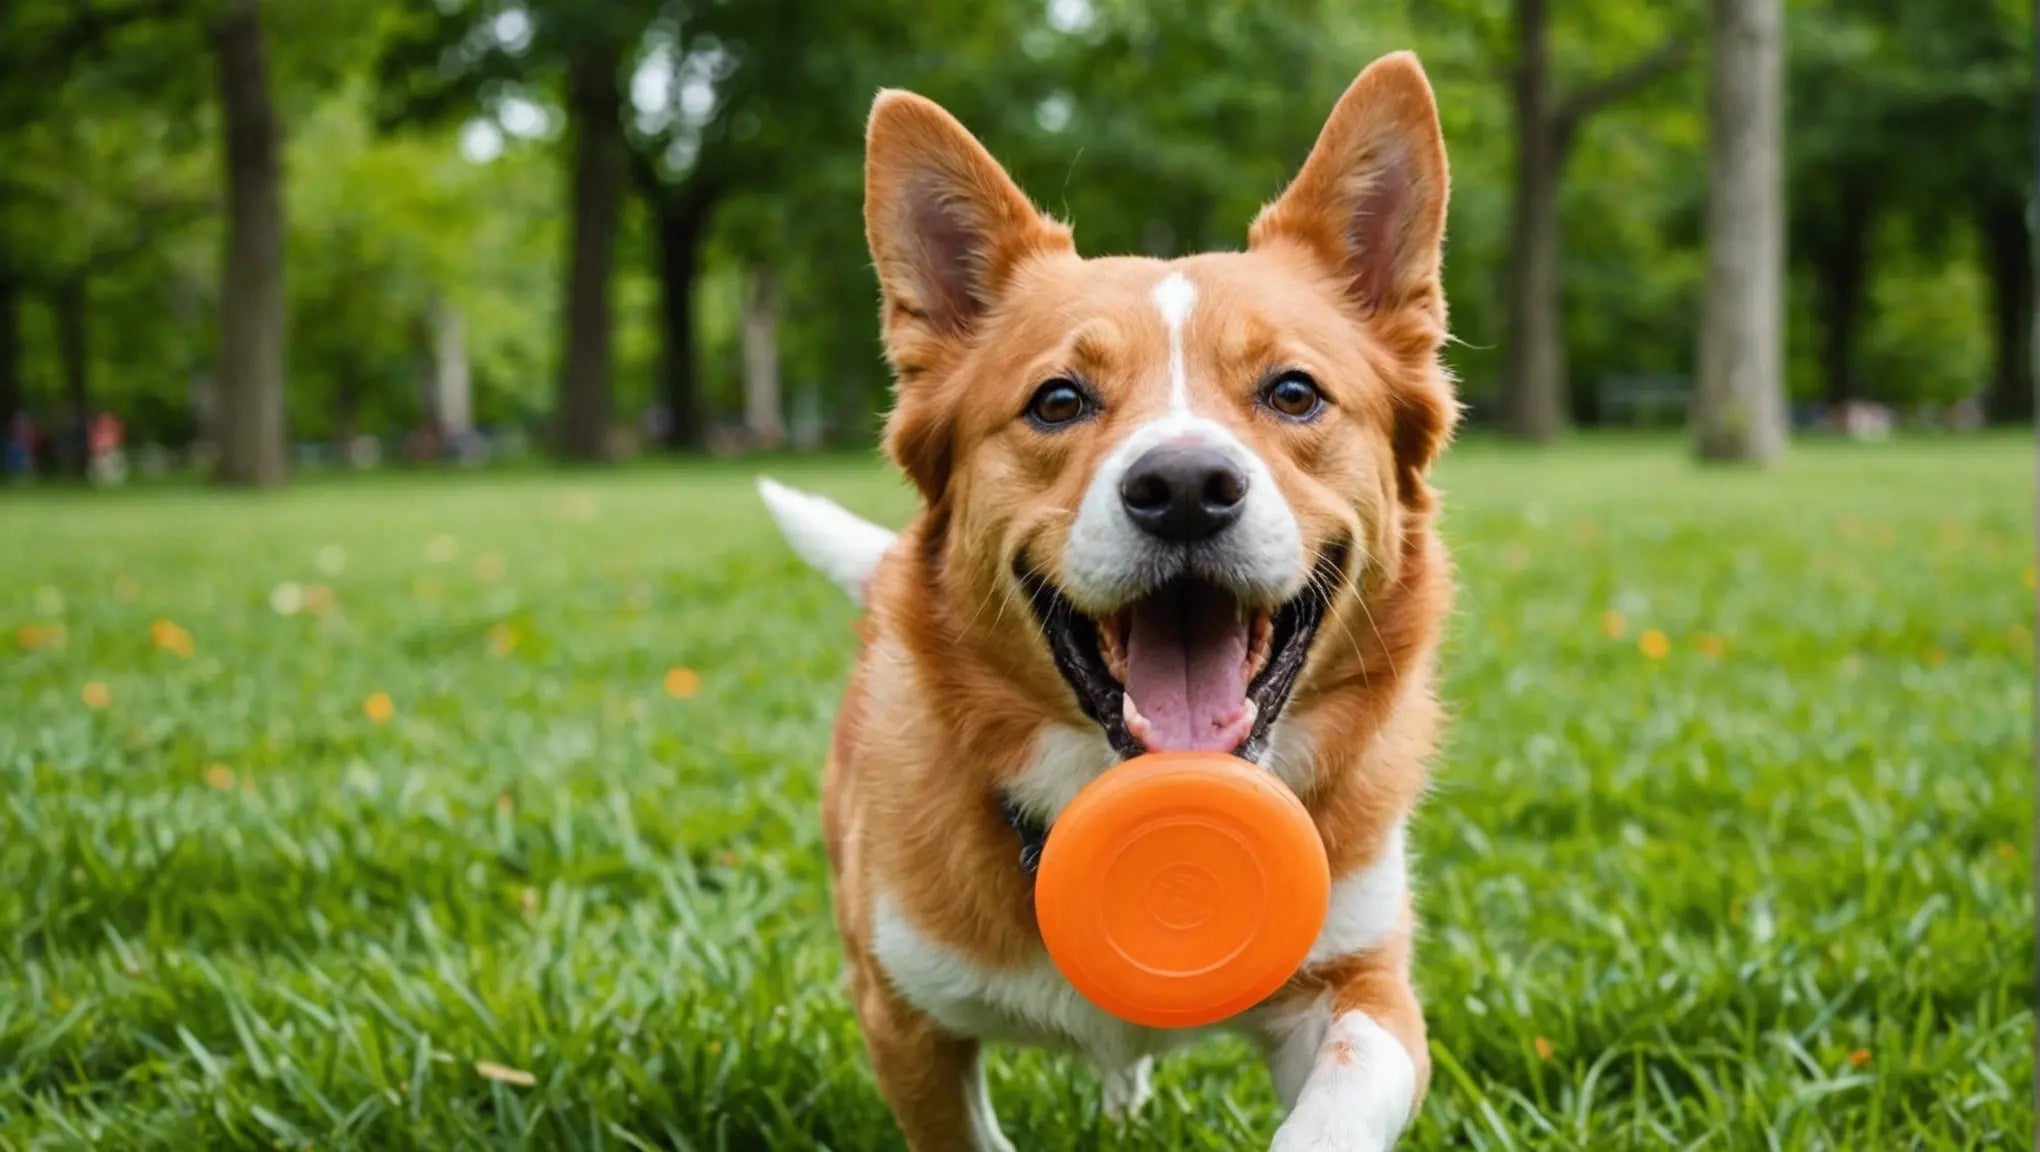 Enhance Your Dog's Outdoor Playtime with These Fun Toys